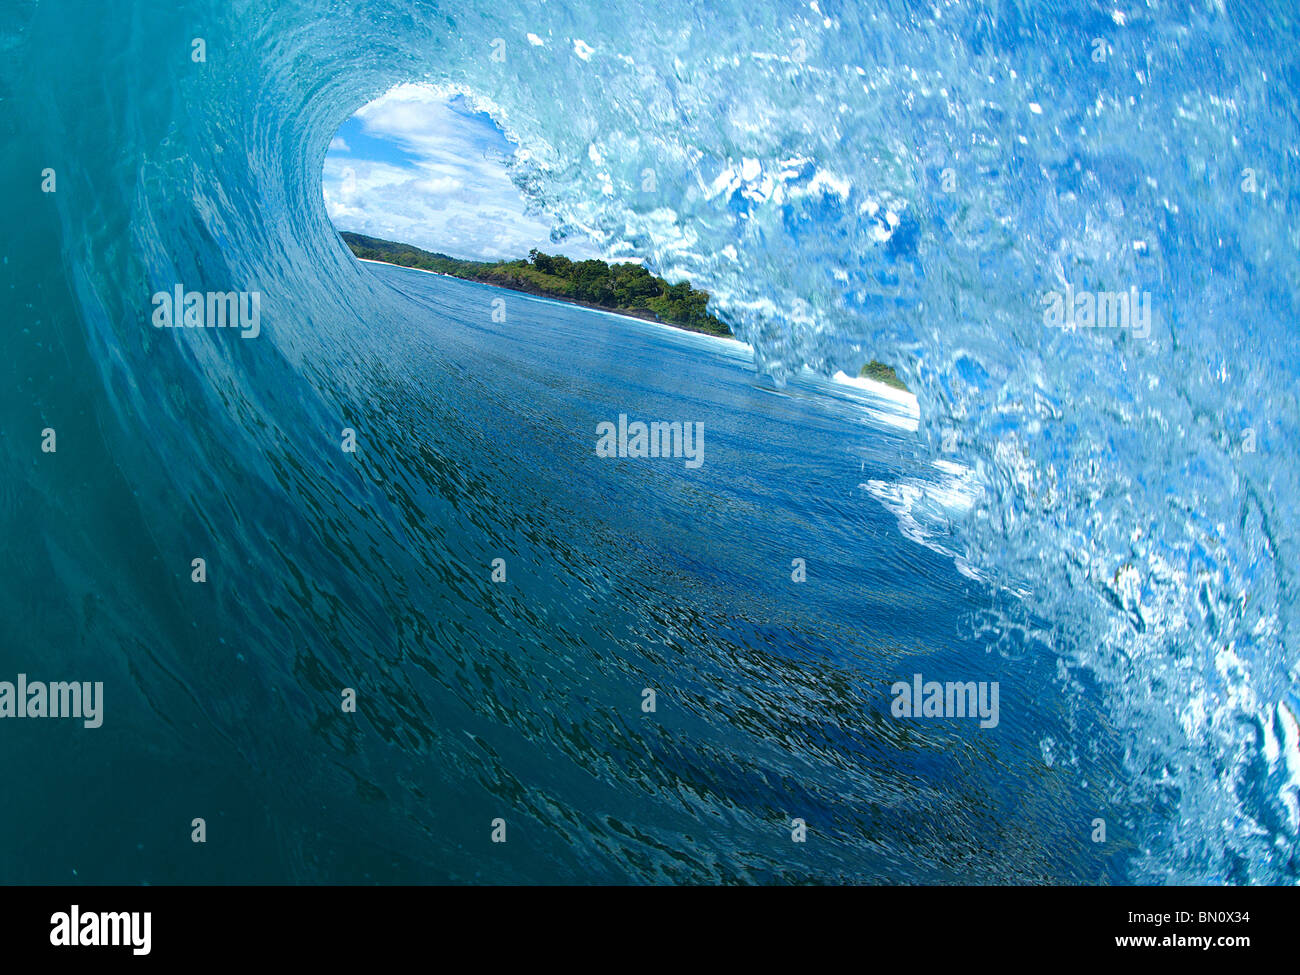 In the tube of a wave Stock Photo